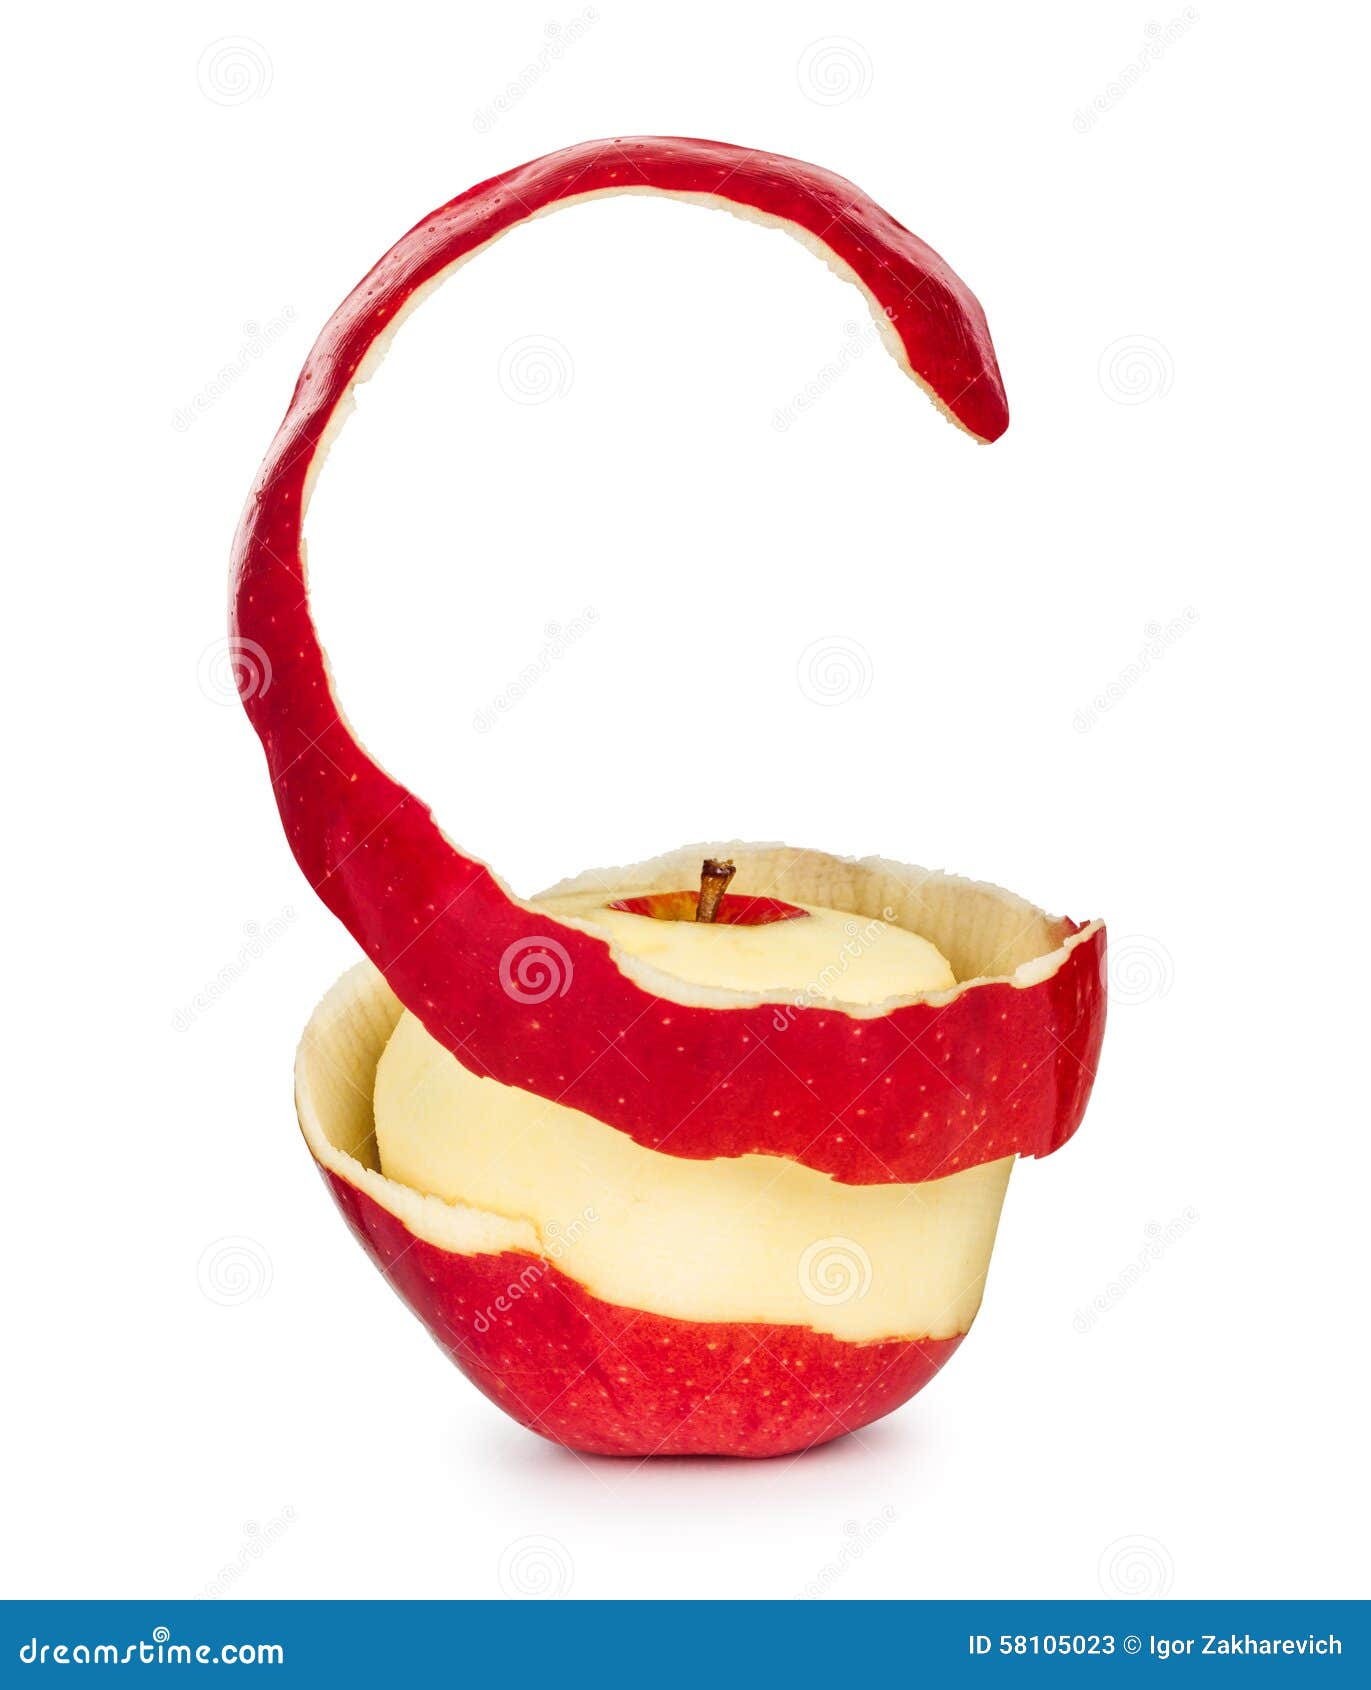 red apple with the peel in a spiral pattern